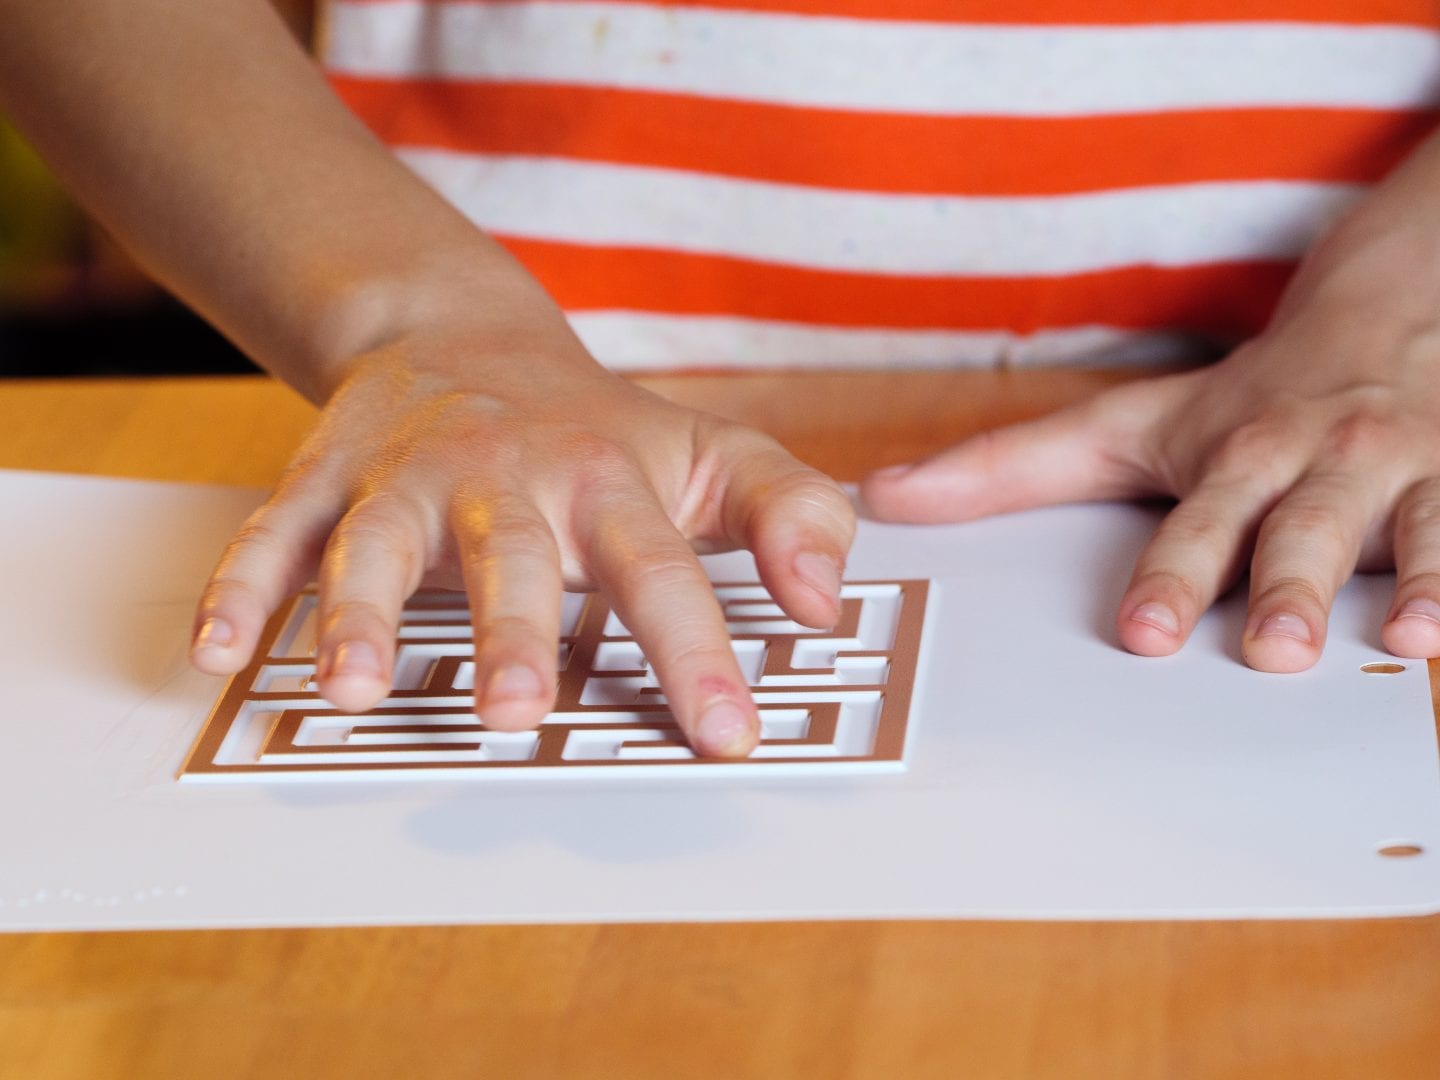 a child standing at a table with their one of their hands exploring a Finger Walks tactile labyrinth